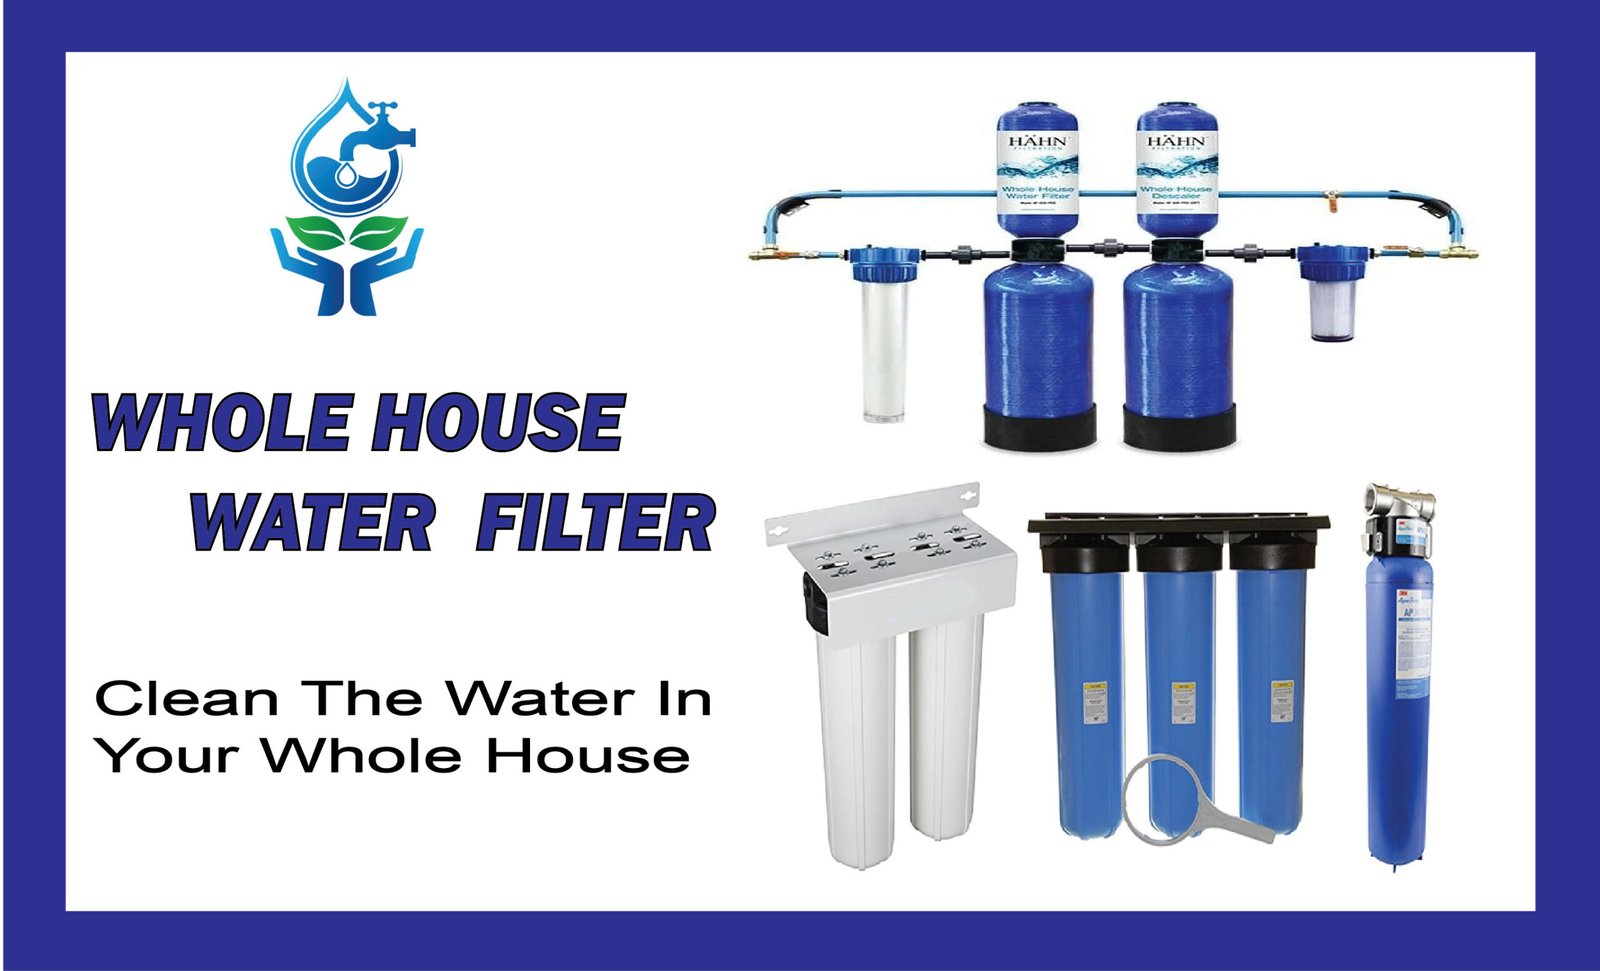 Whole House Water Filter: Empower Clean Water Made Simple